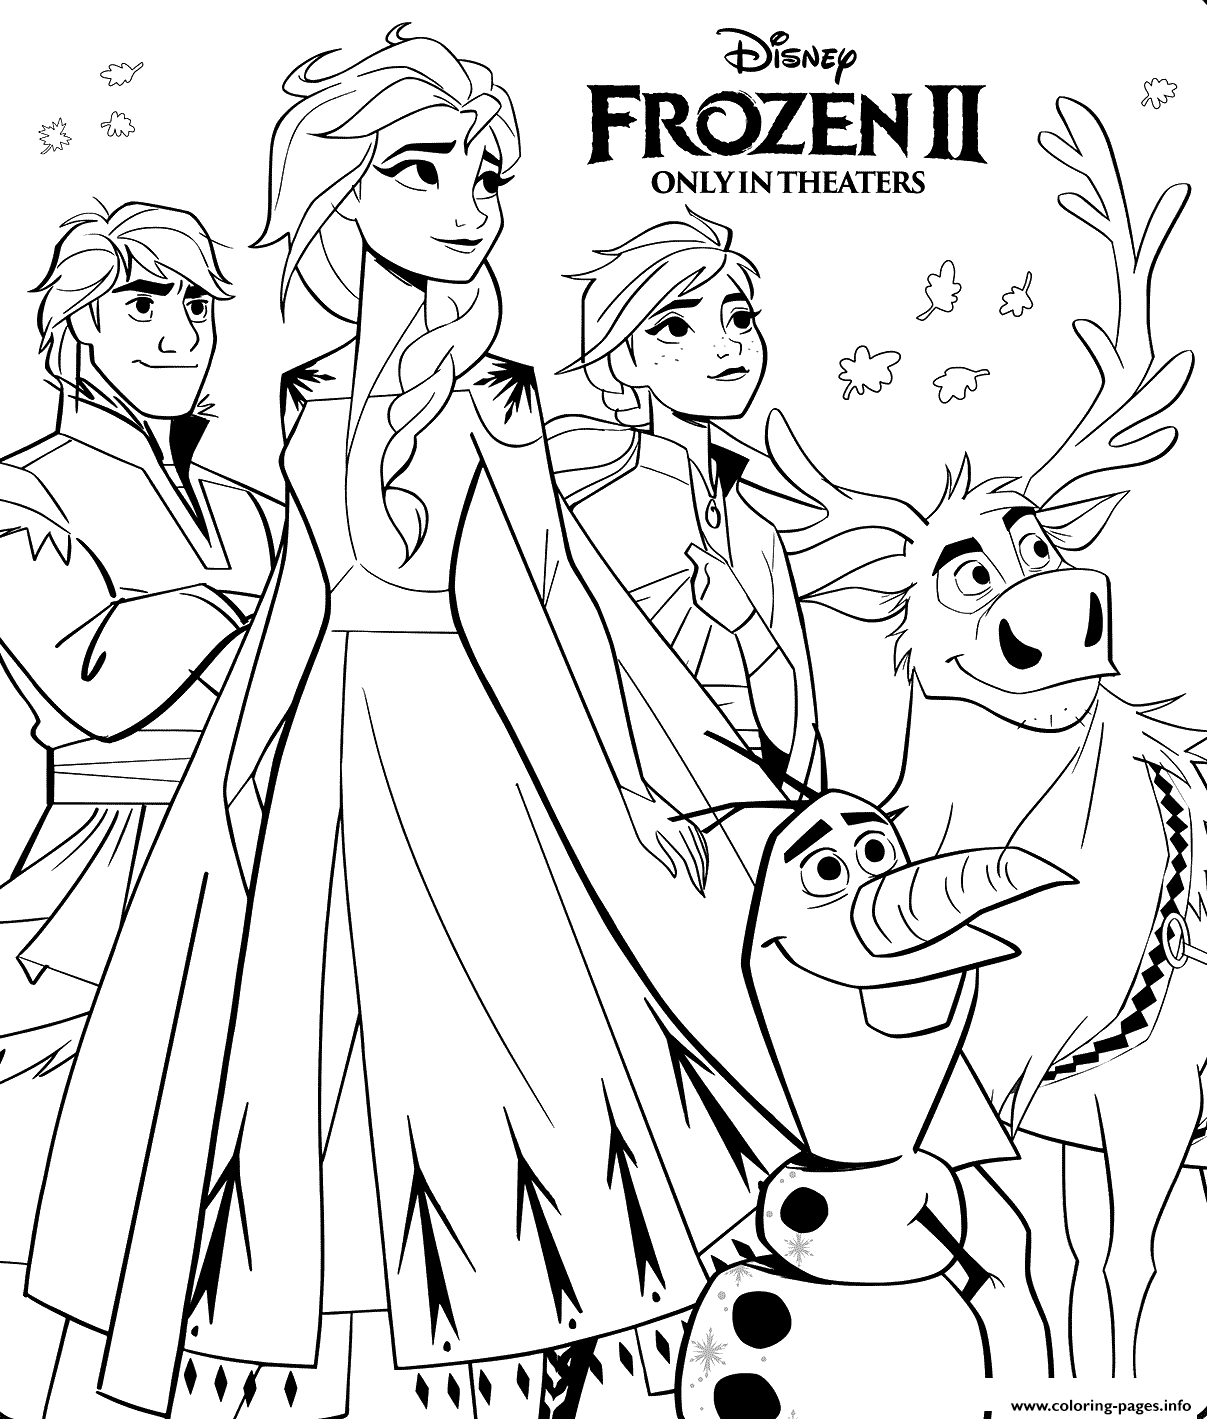 Coloring Pages For Kids Frozen 2 Frozen 2 Elsa and Anna coloring